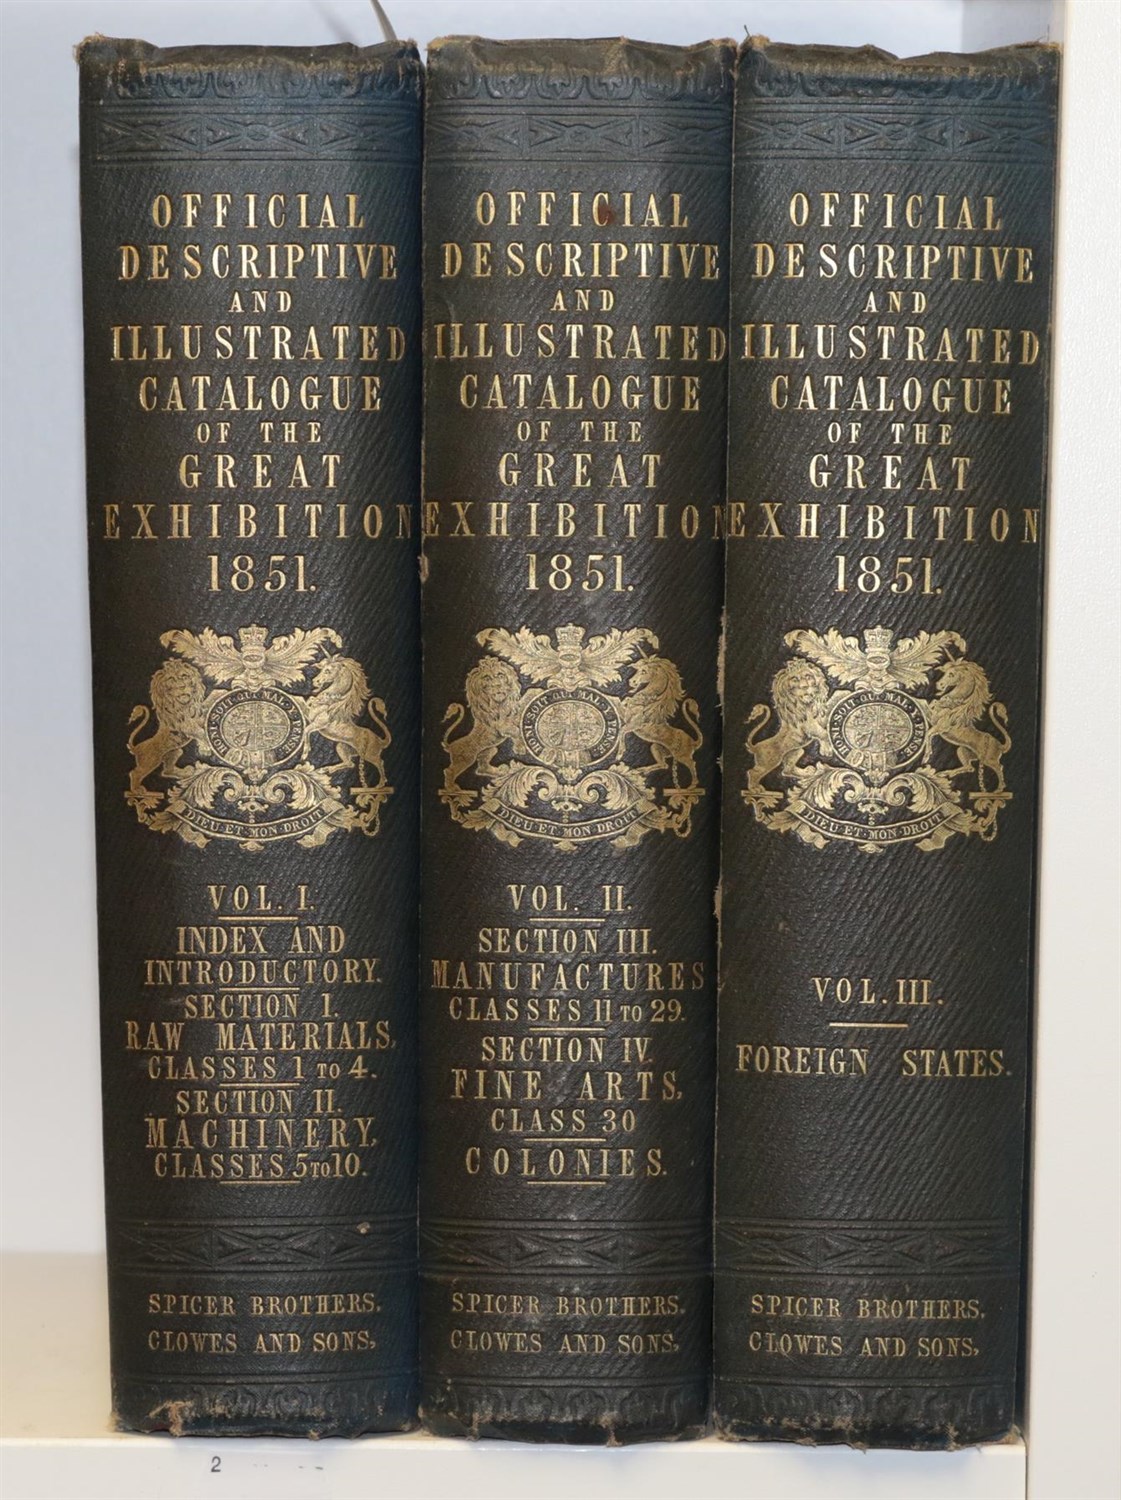 Lot 3003 - Great Exhibition of the Works of Industry ...1851 Official Descriptive and Illustrated...